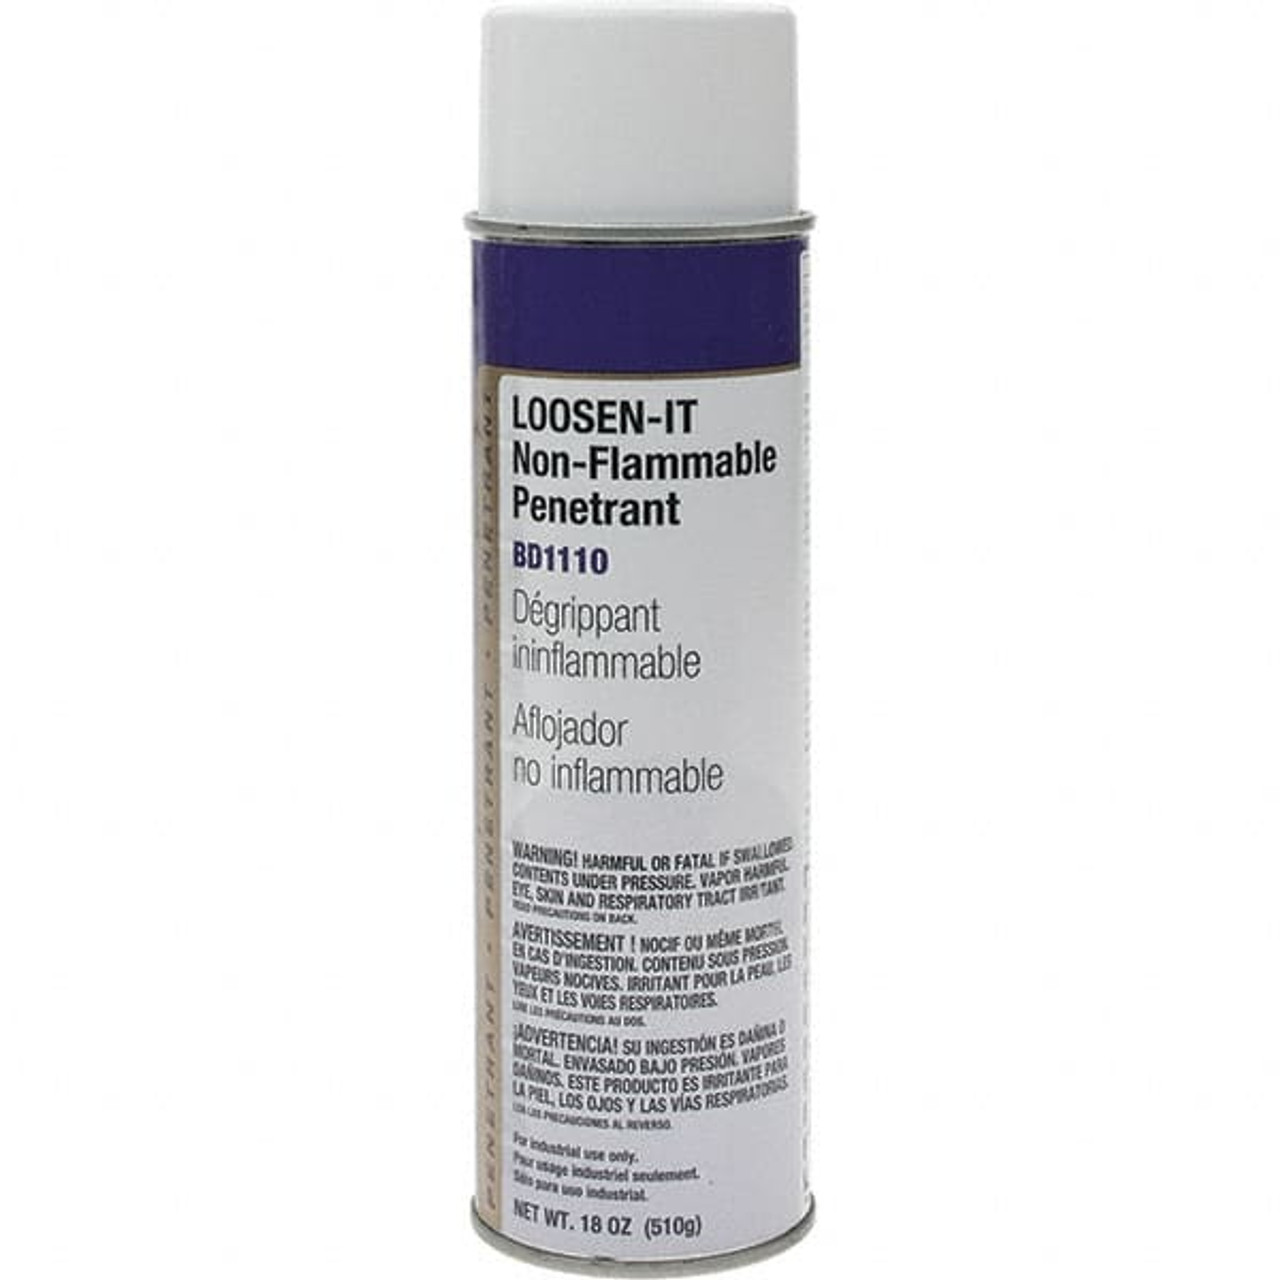 Loosening aerosol lubricant for the industry in general